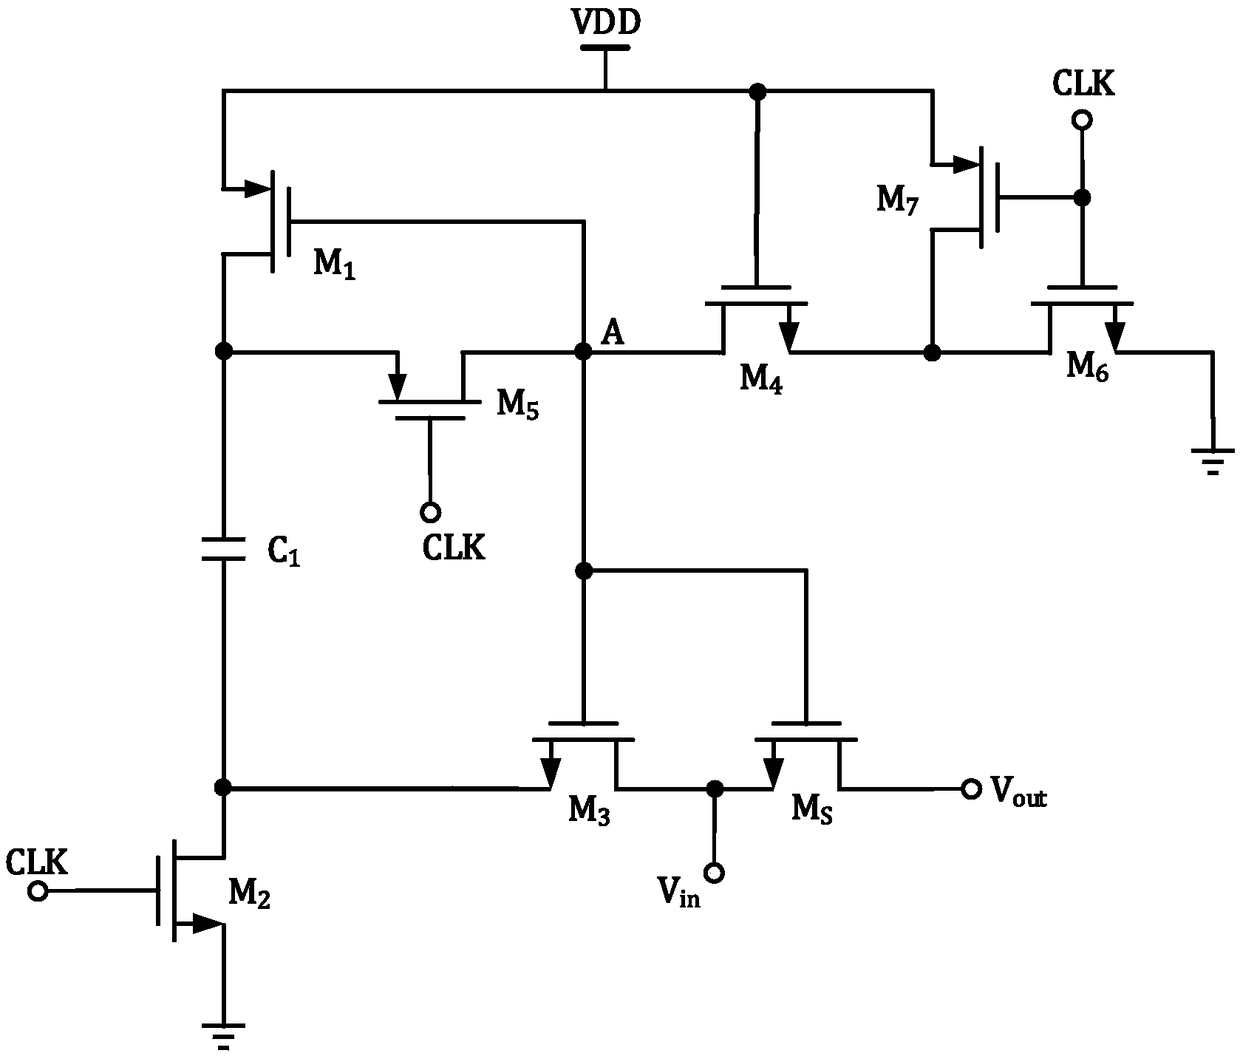 A gate voltage bootstrap switch circuit